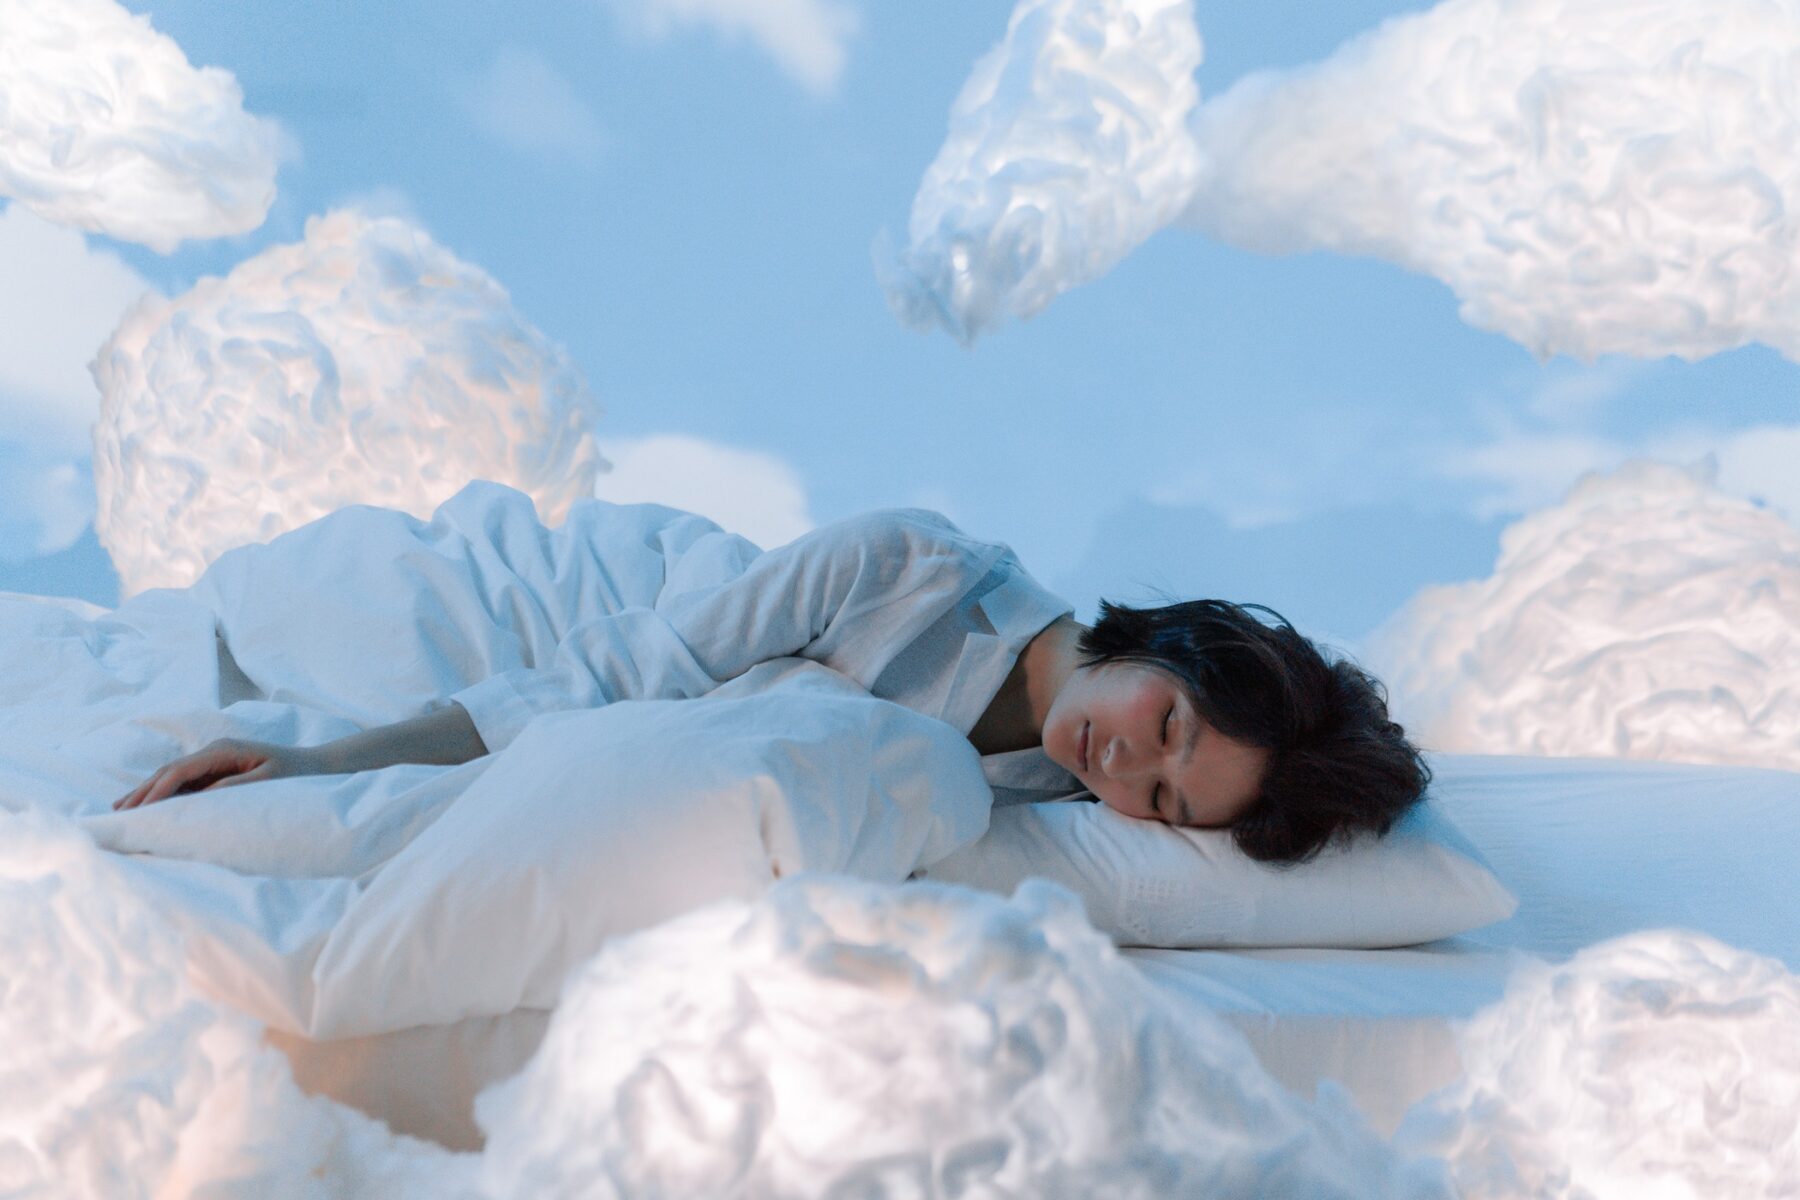 A person sleeps on a white sheet surrounded by fluffy clouds and a blue backdrop.